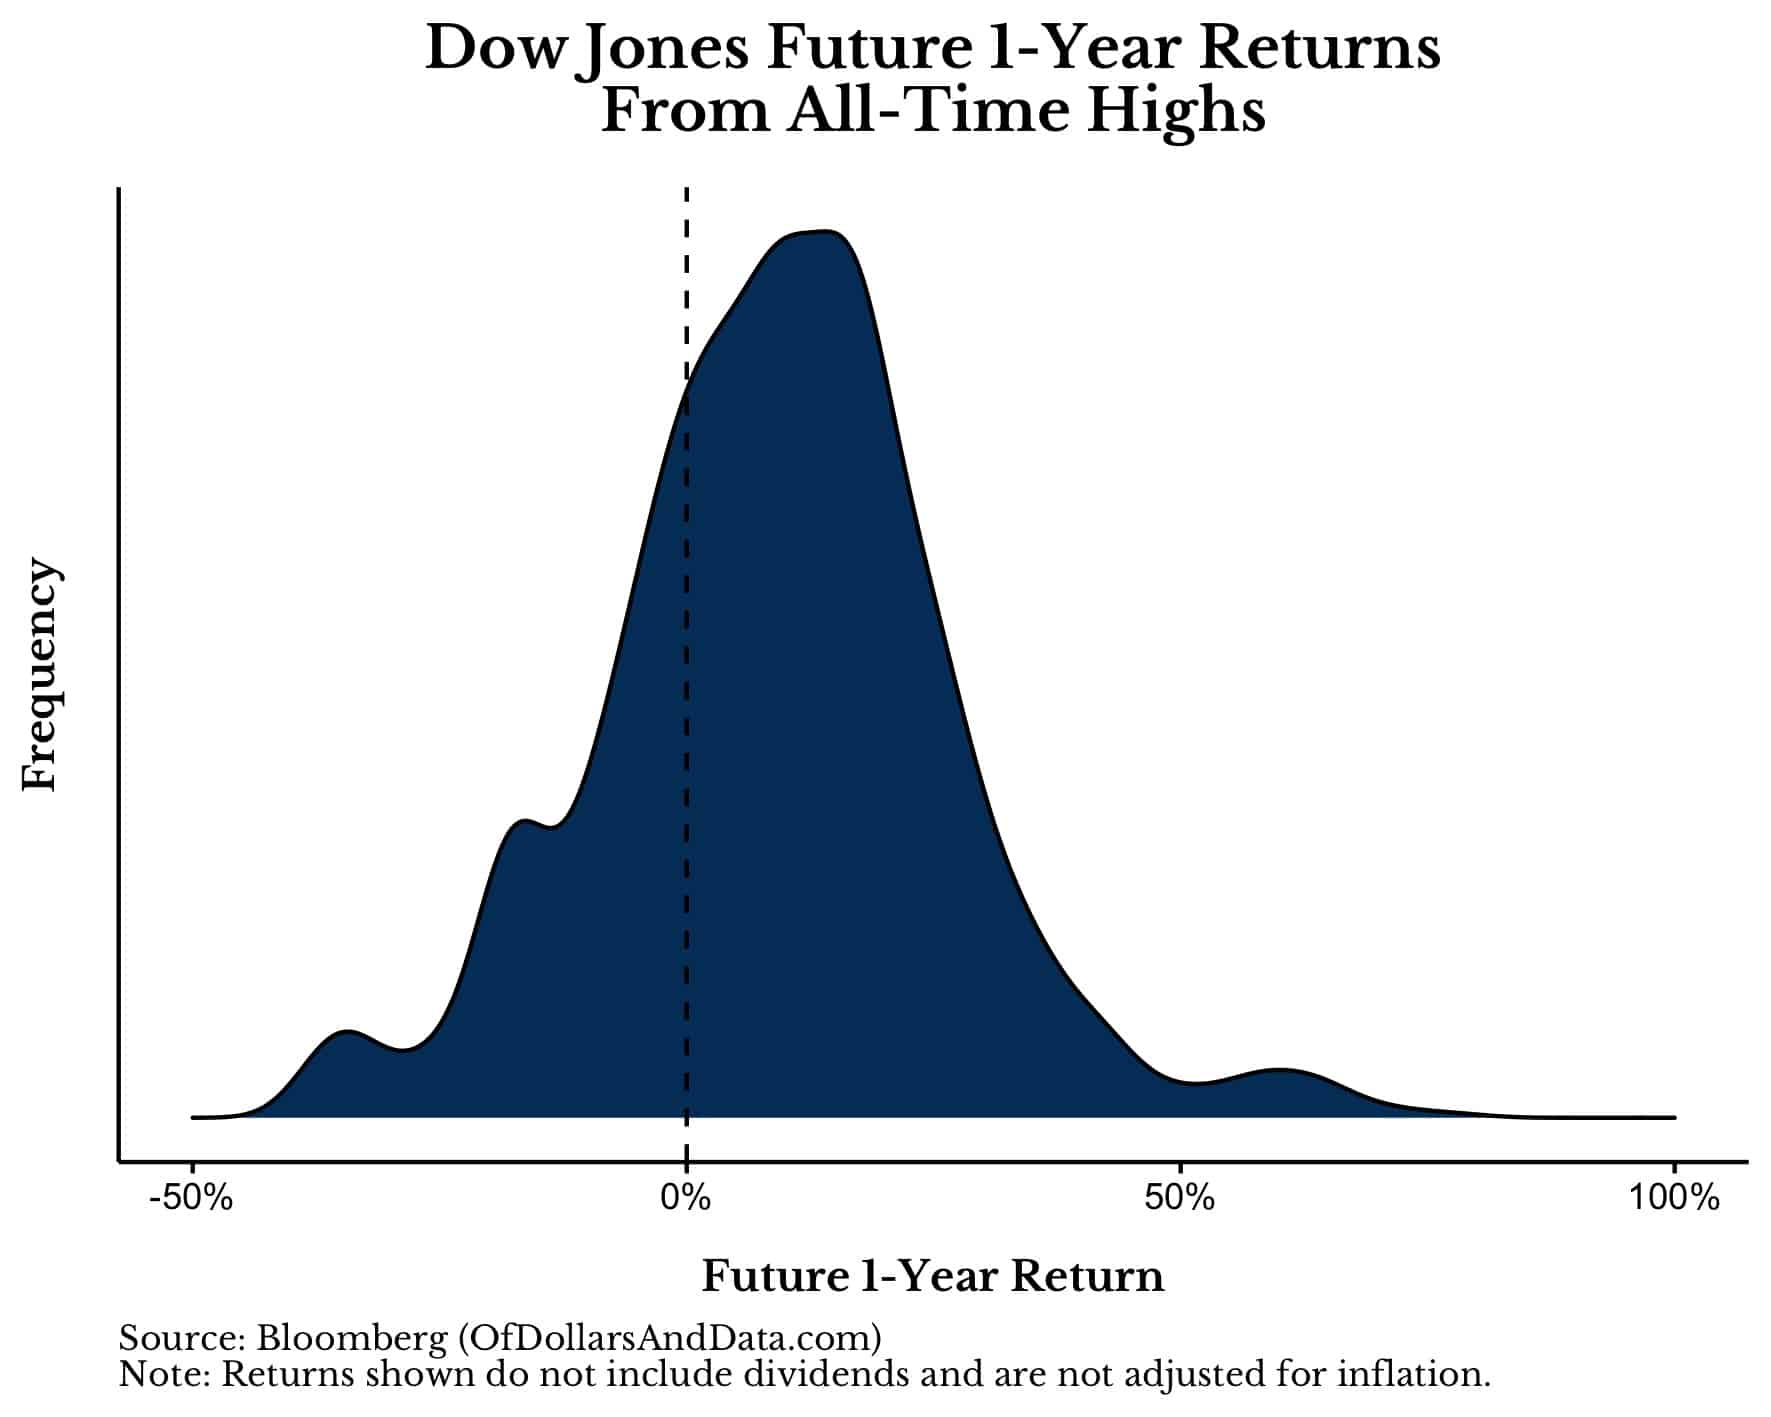 Distribution of Dow Jones Industrial Average 1-year future returns from all time highs.